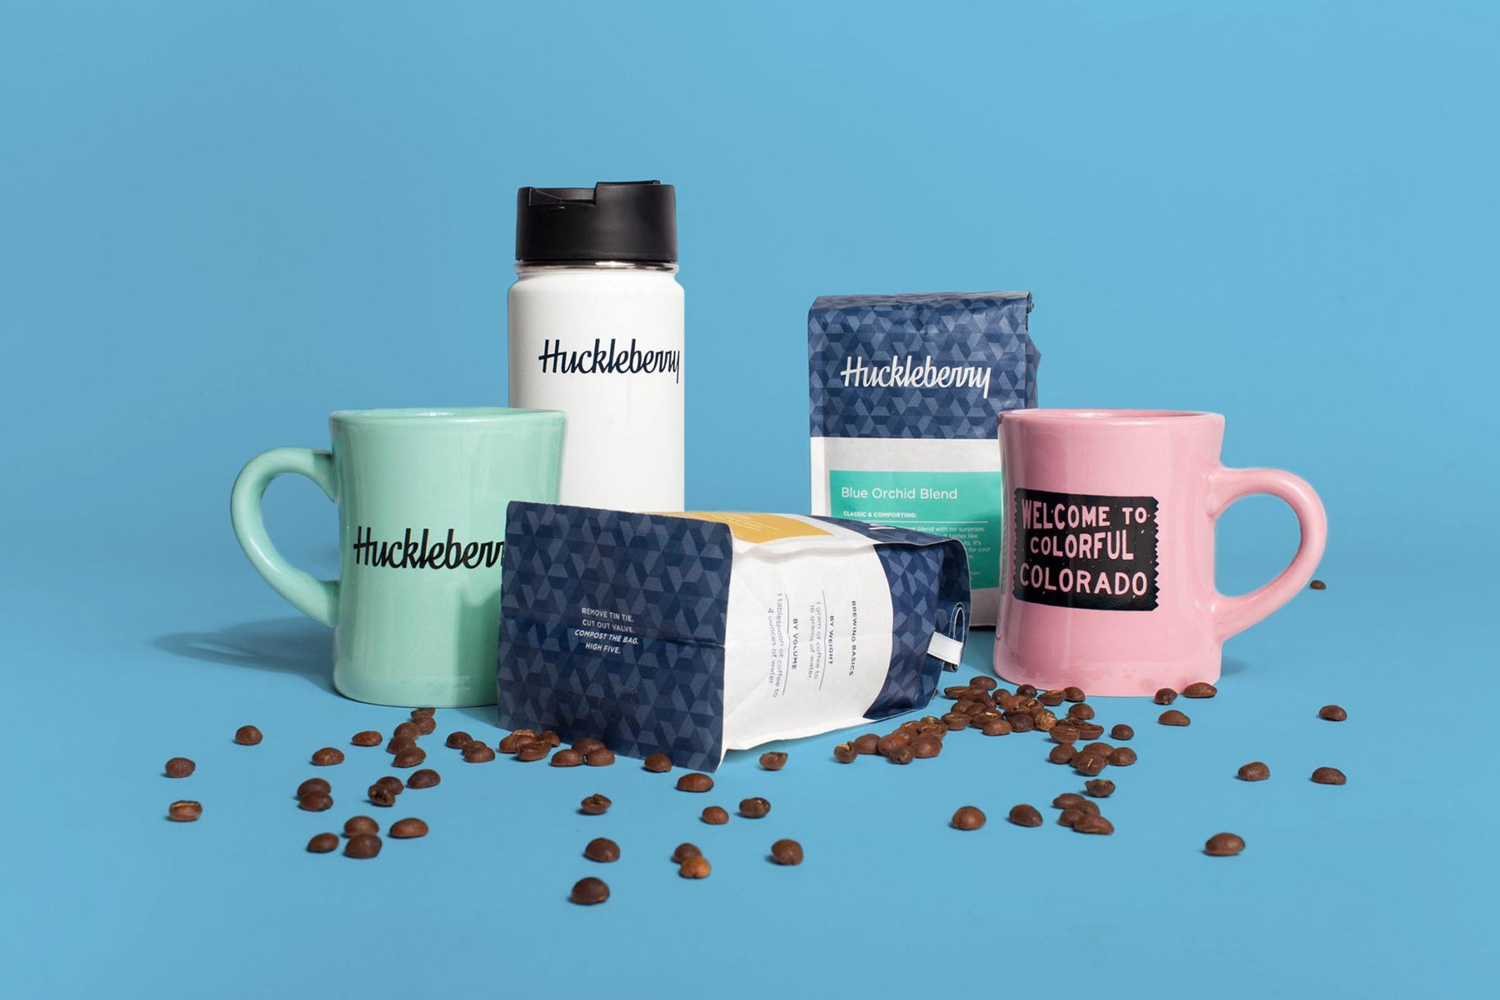 New packaging for Colorado coffee roaster Huckleberry by Mast